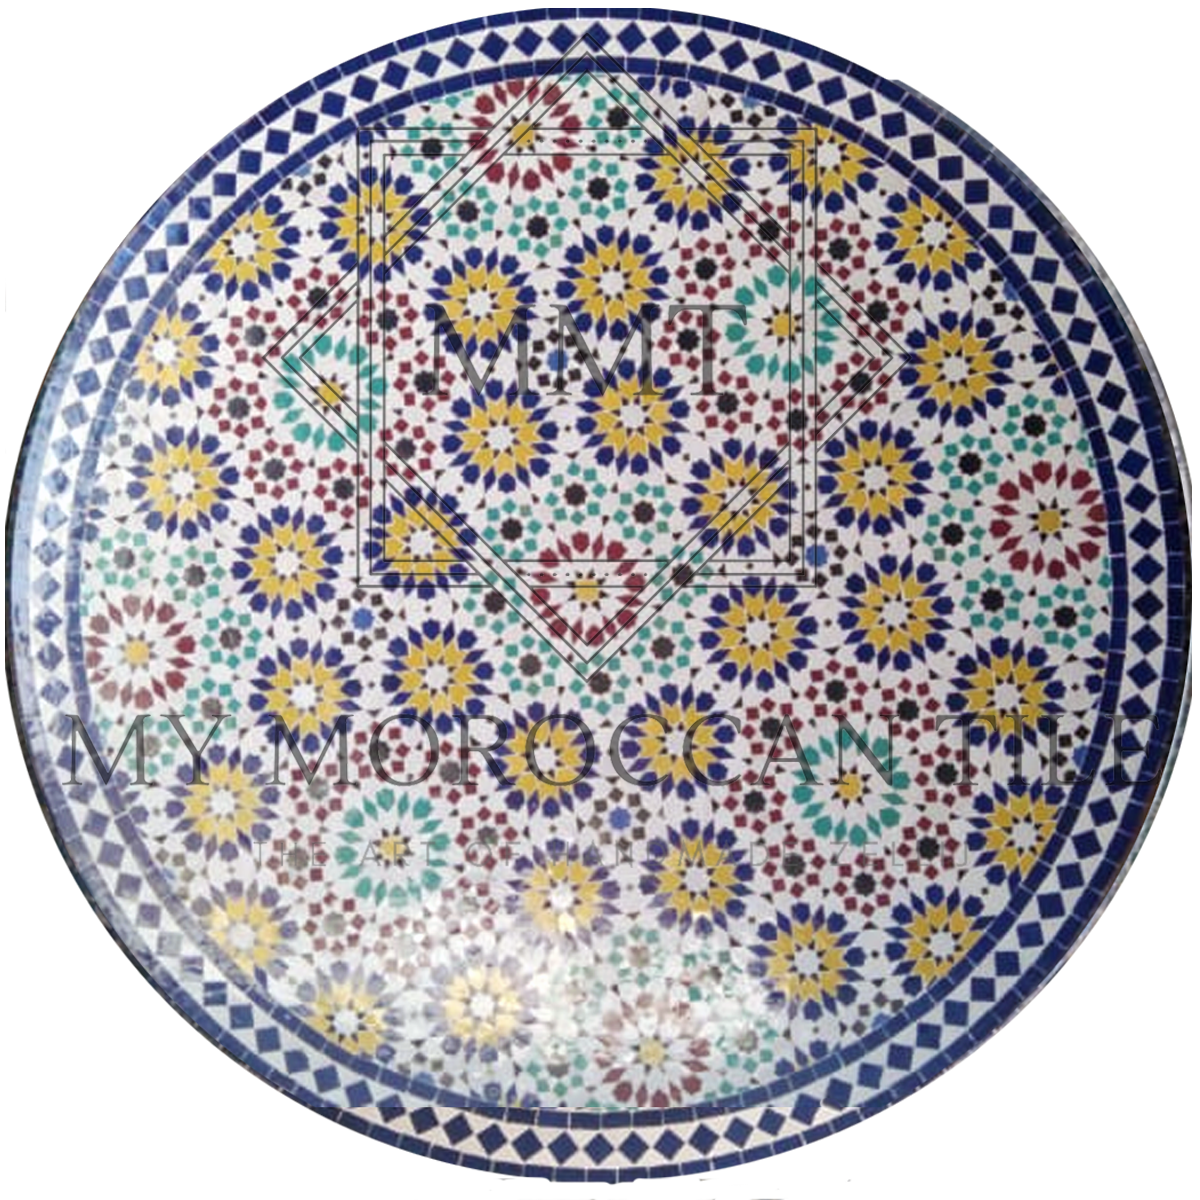 Moroccan mosaic table with mosaic 182